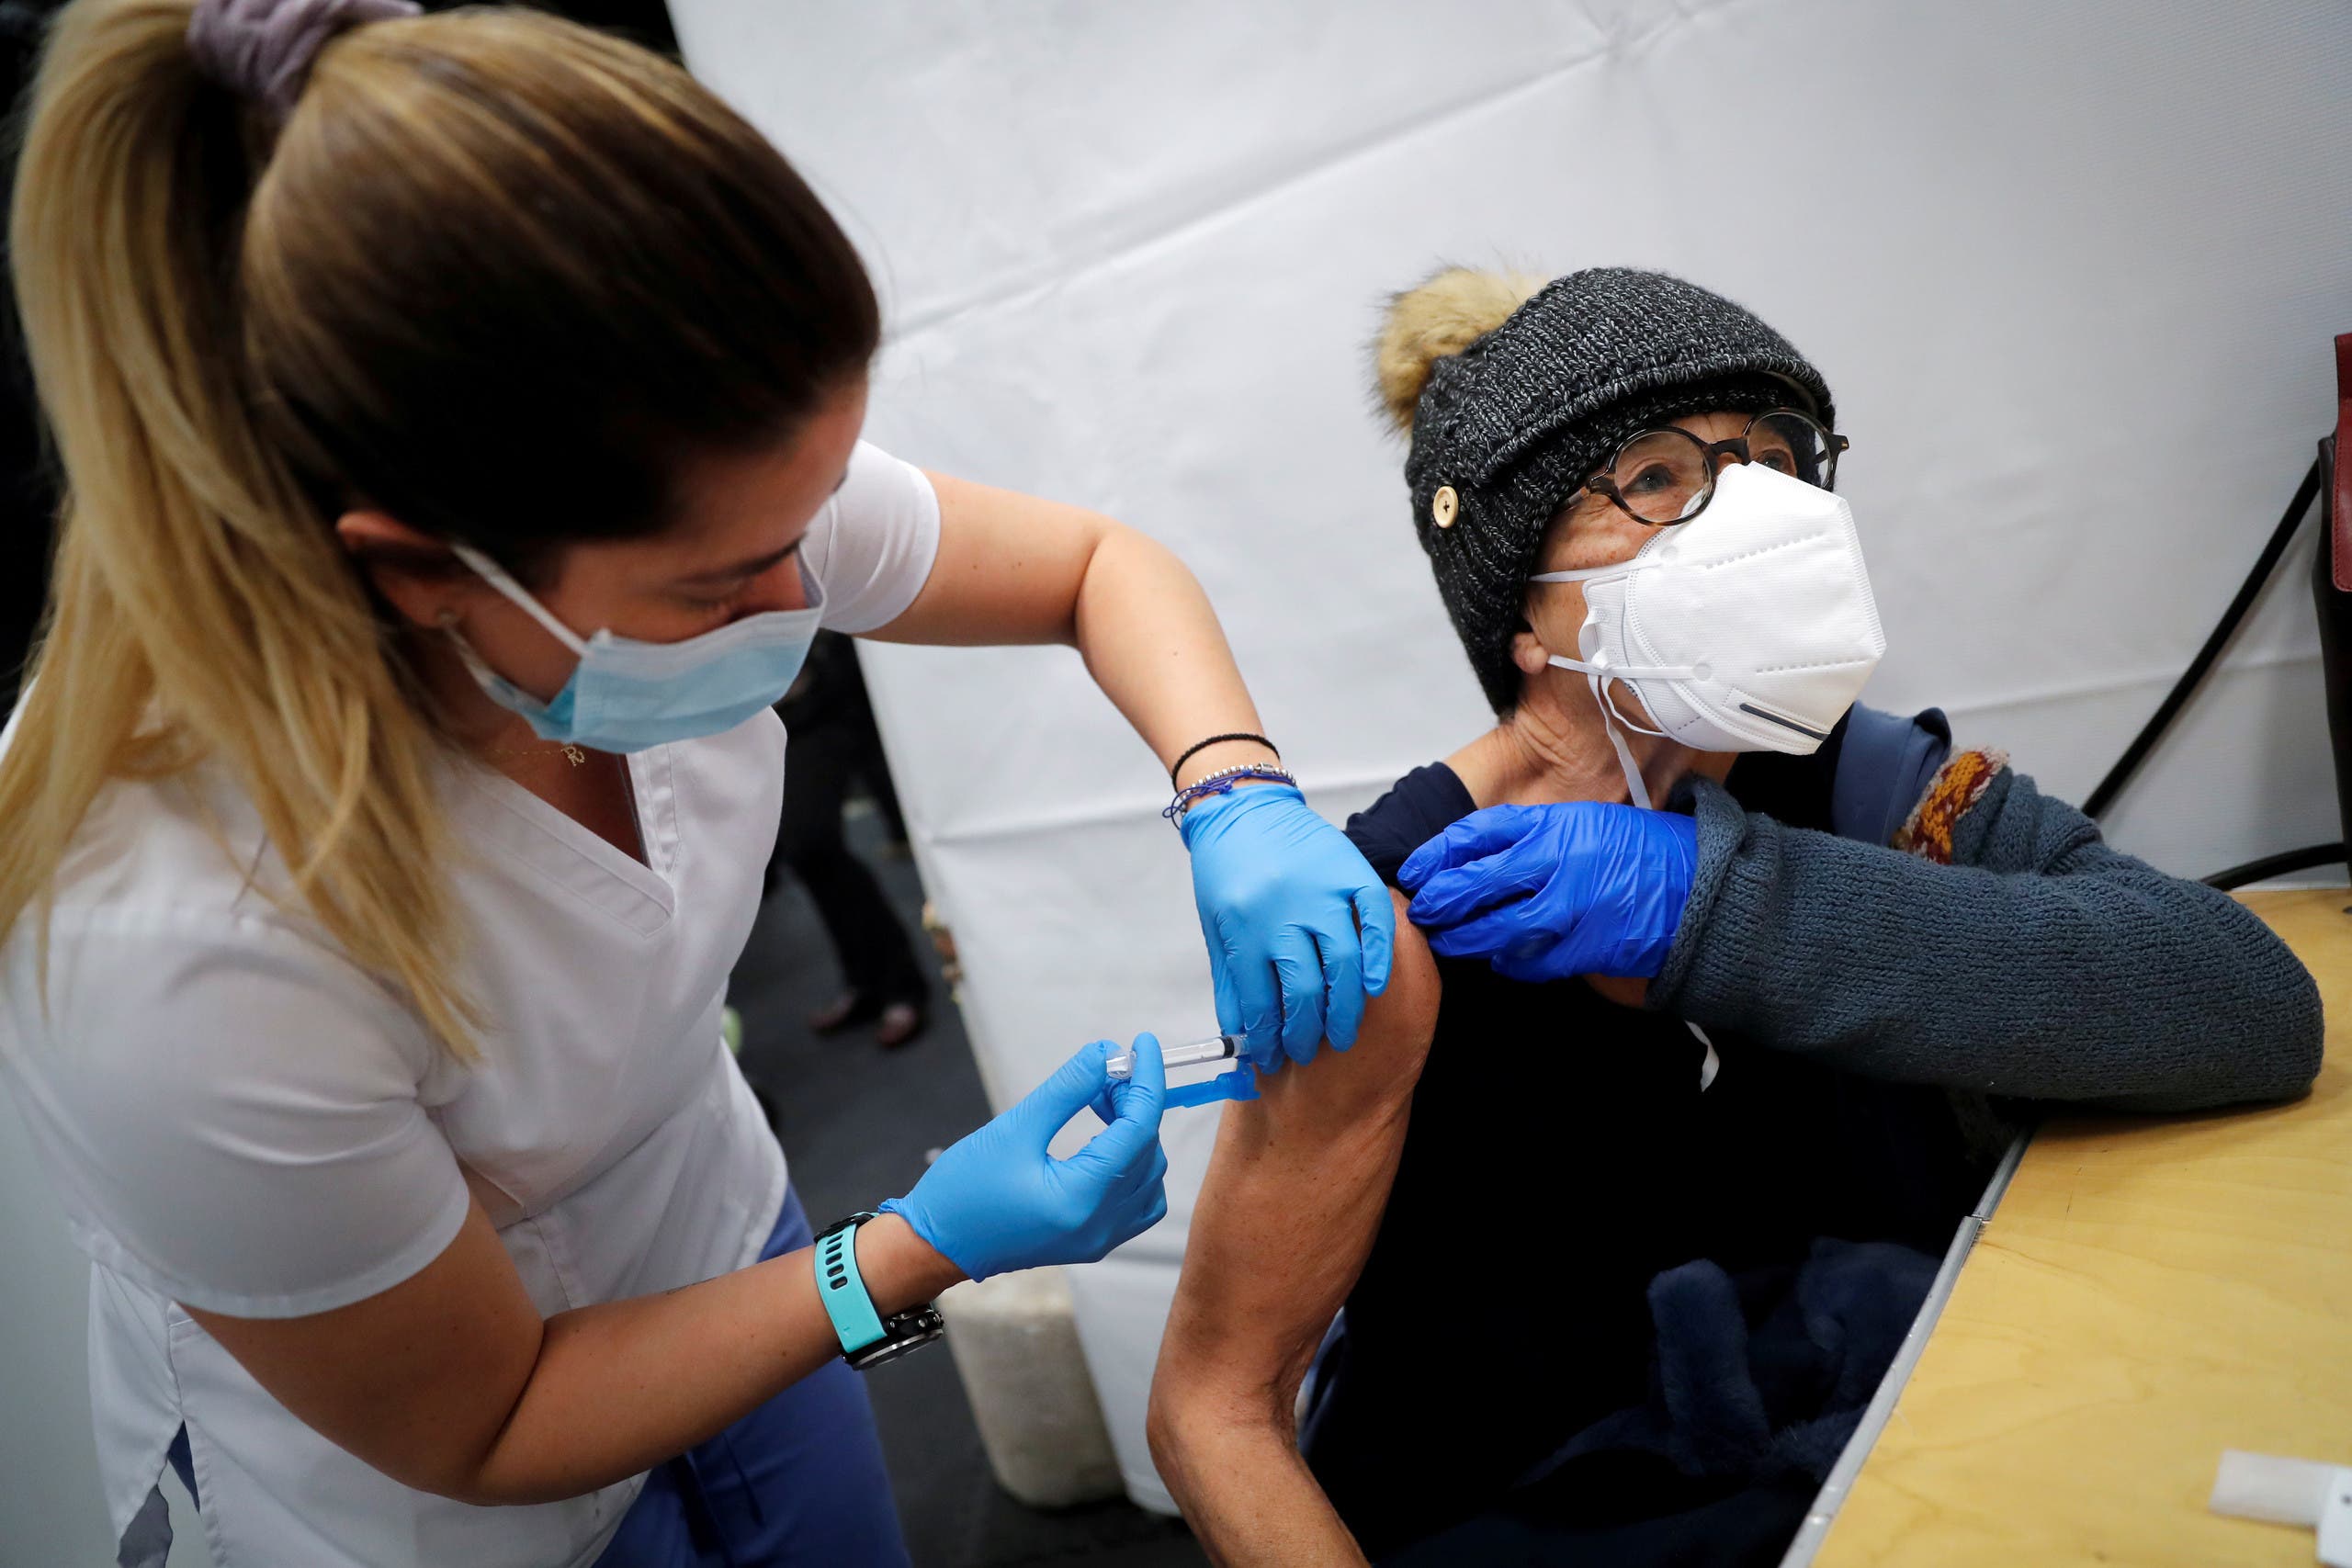 A healthcare worker administers a shot of the Moderna COVID-19 Vaccine to a woman in New York City. (File photo: Reuters)